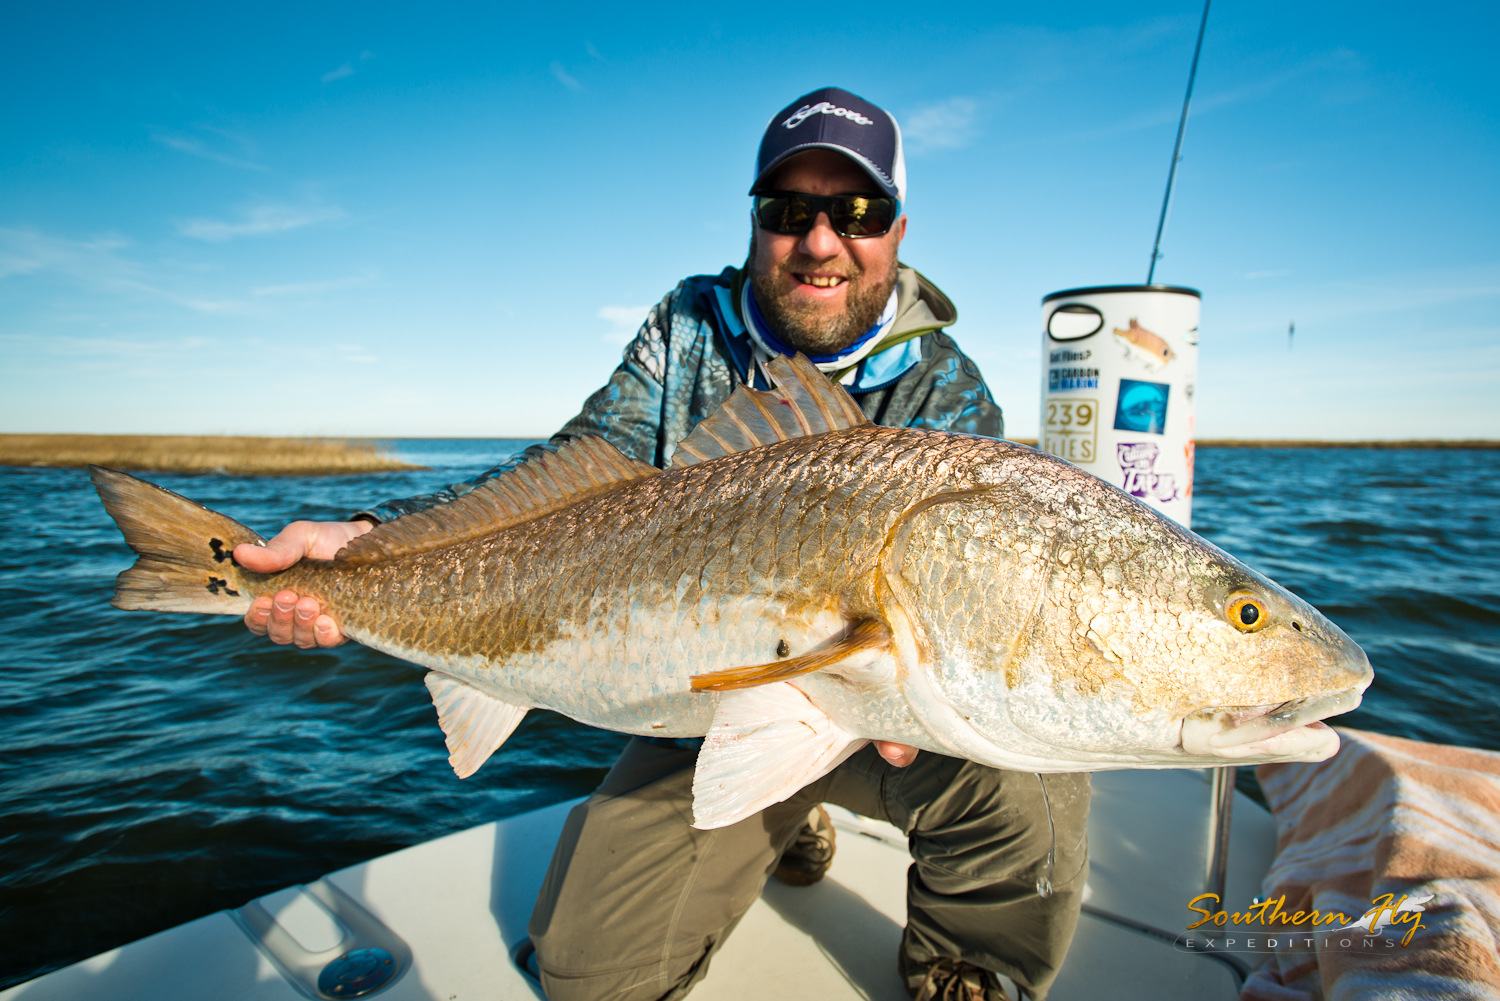 Military Veterans Fly Fishing New Orleans Southern Fly Expeditions